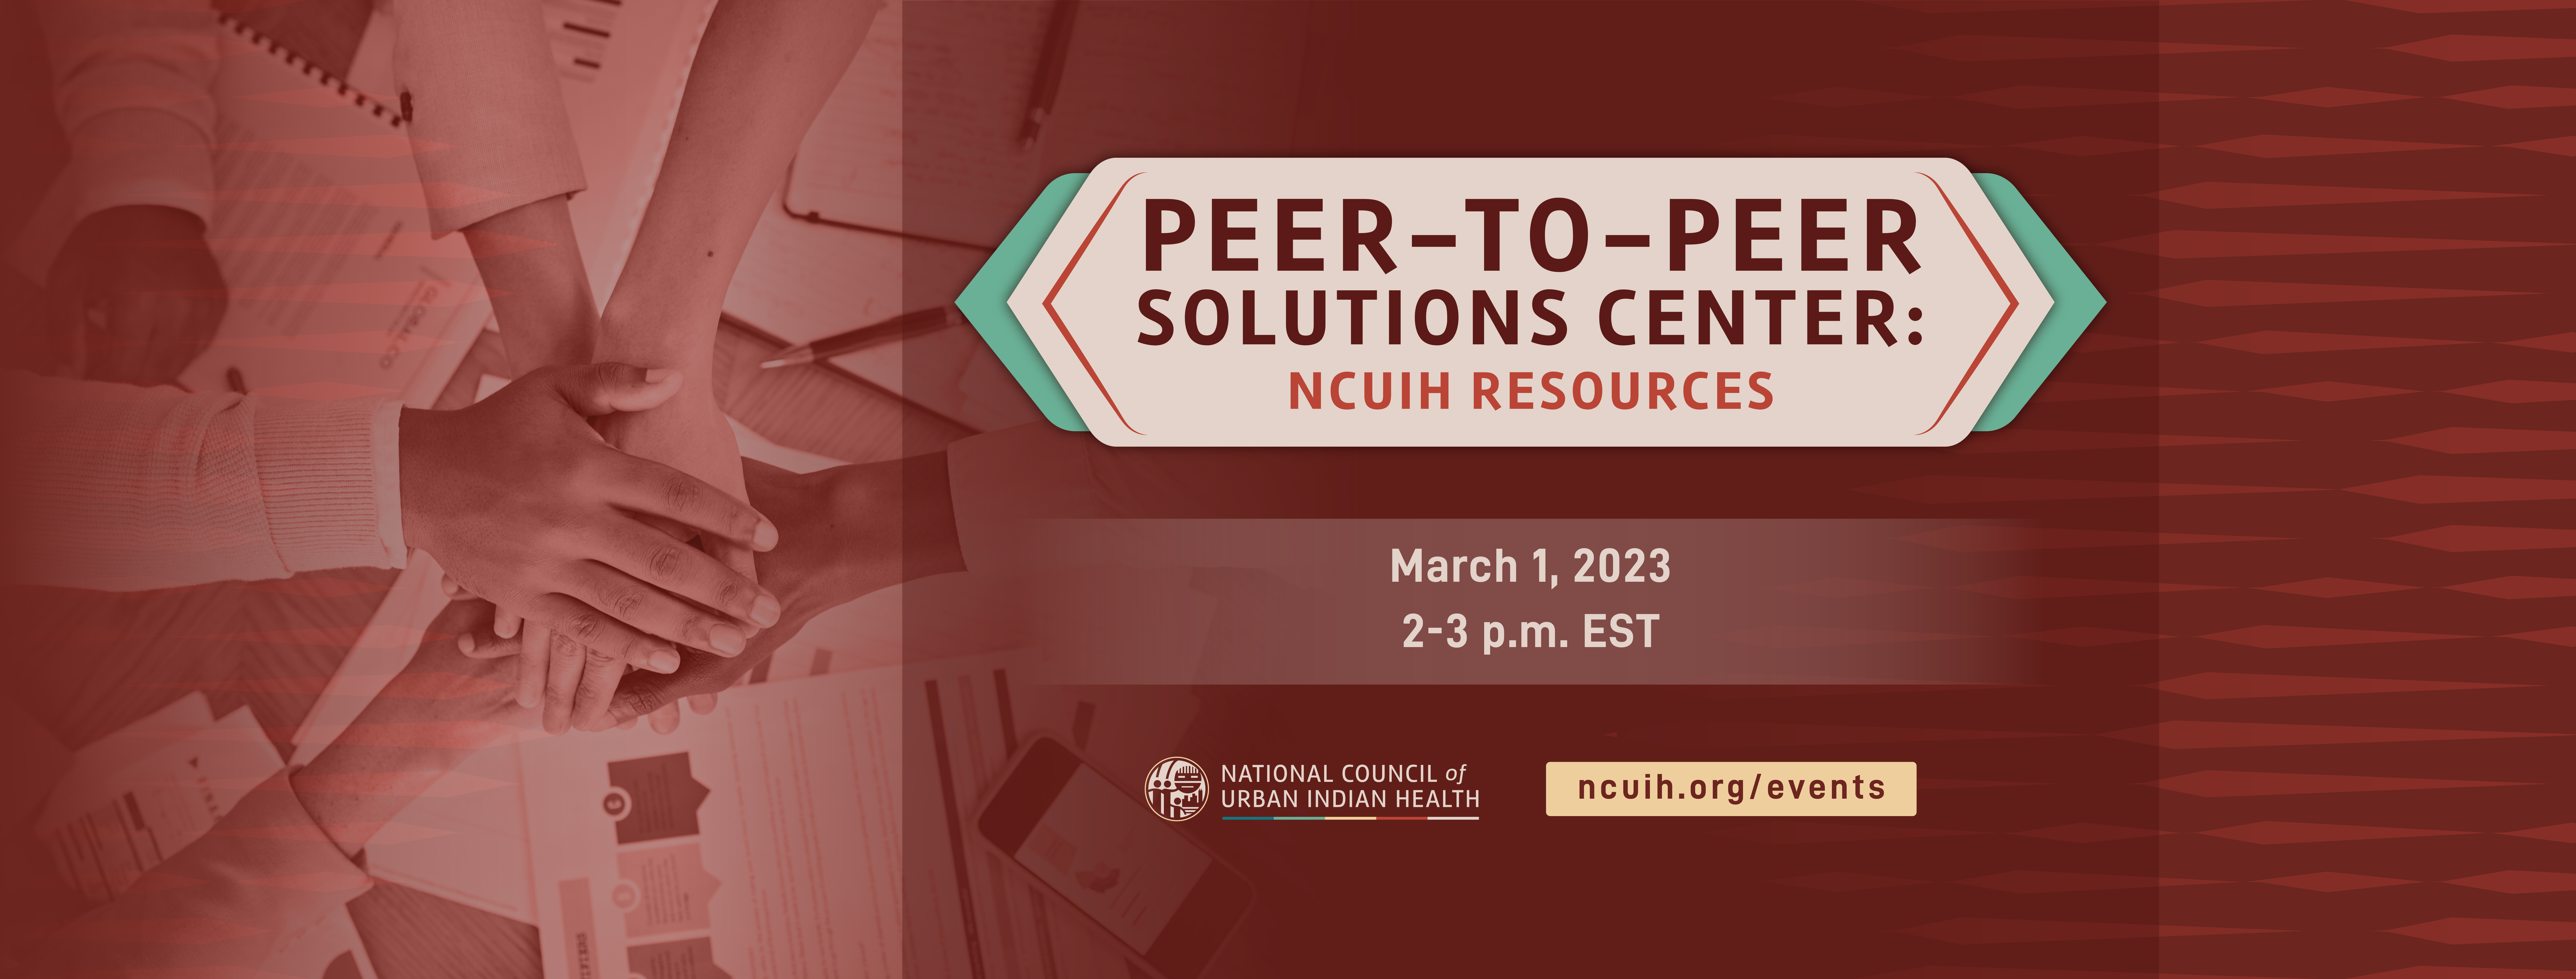 Peer-to-Peer Solutions Center - Chaha’oh/Gathering of People: NCUIH Resources